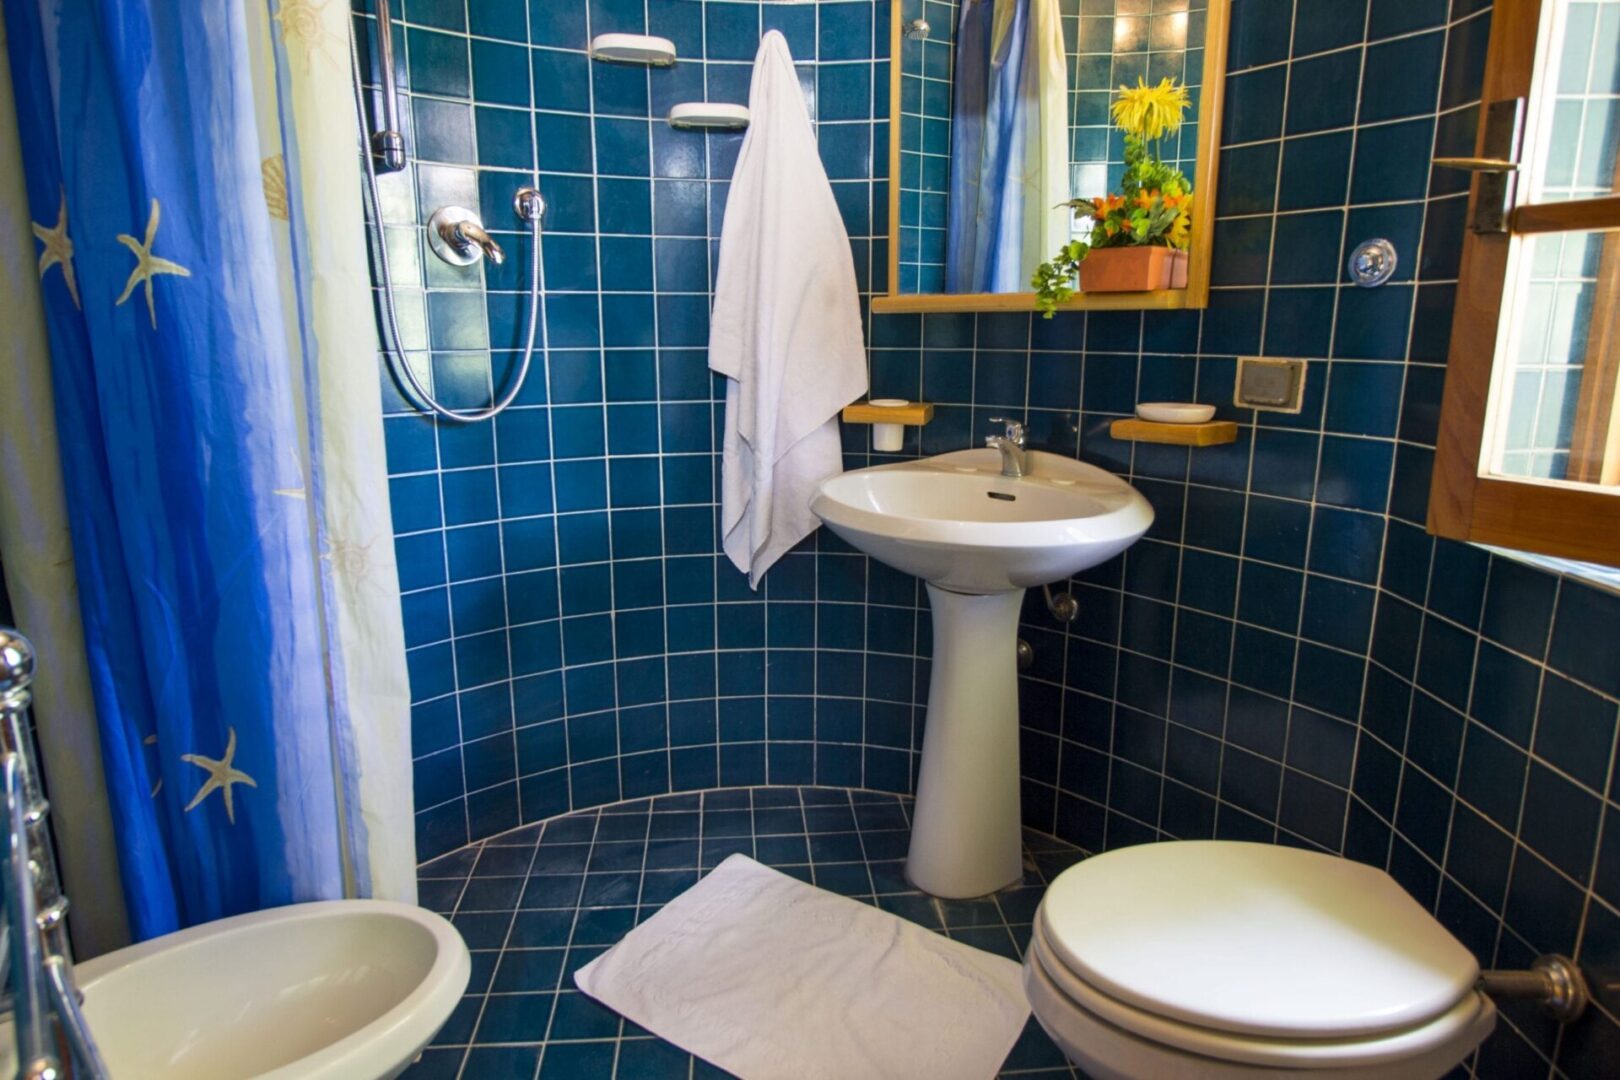 A bathroom with blue tile and white fixtures.